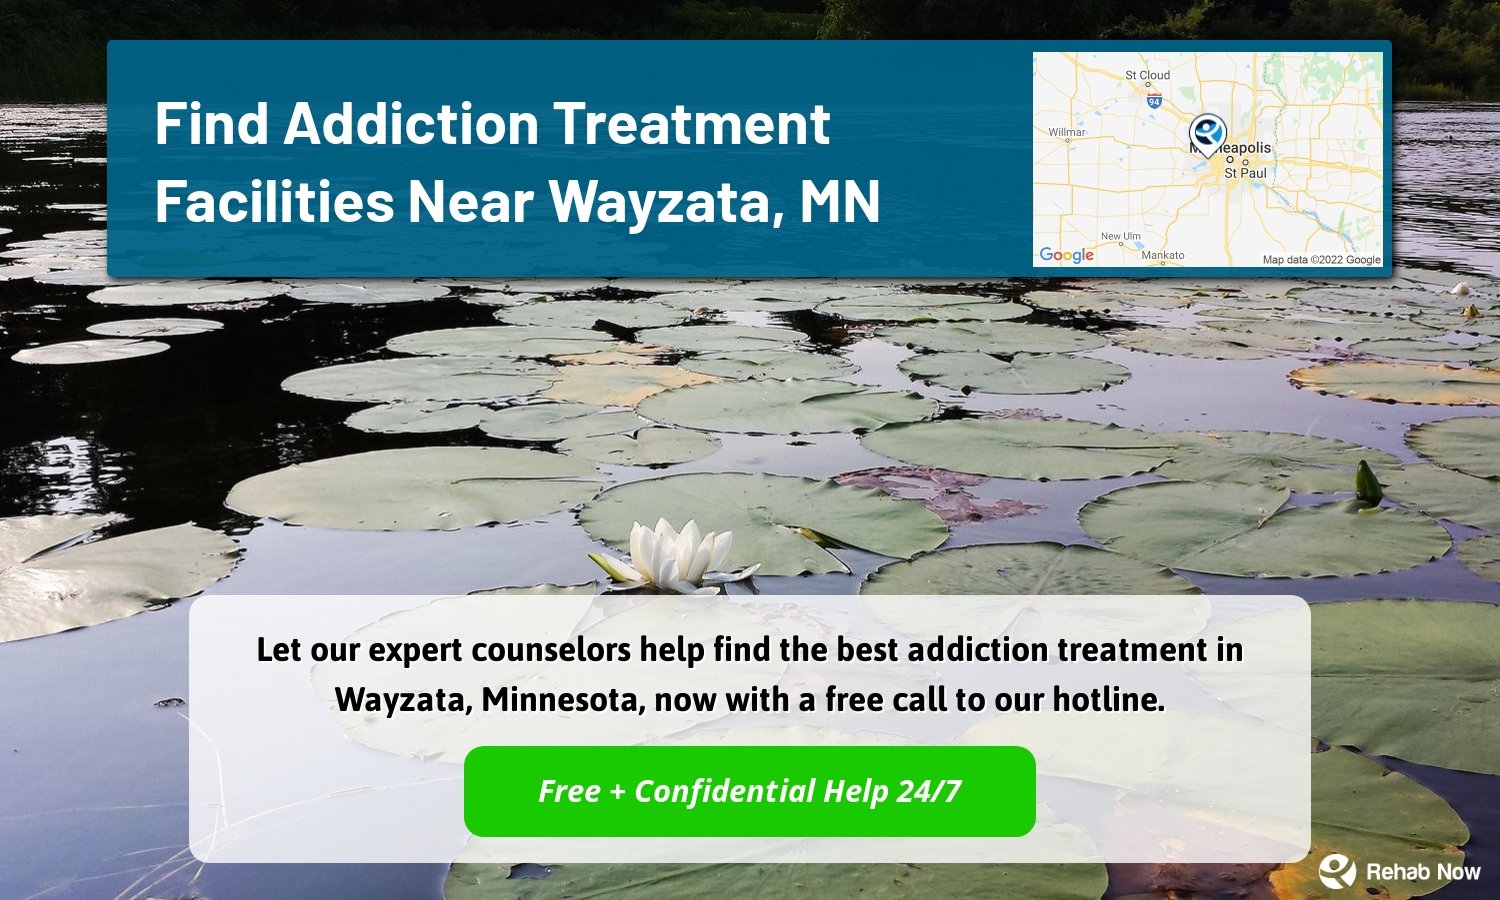 Let our expert counselors help find the best addiction treatment in Wayzata, Minnesota, now with a free call to our hotline.